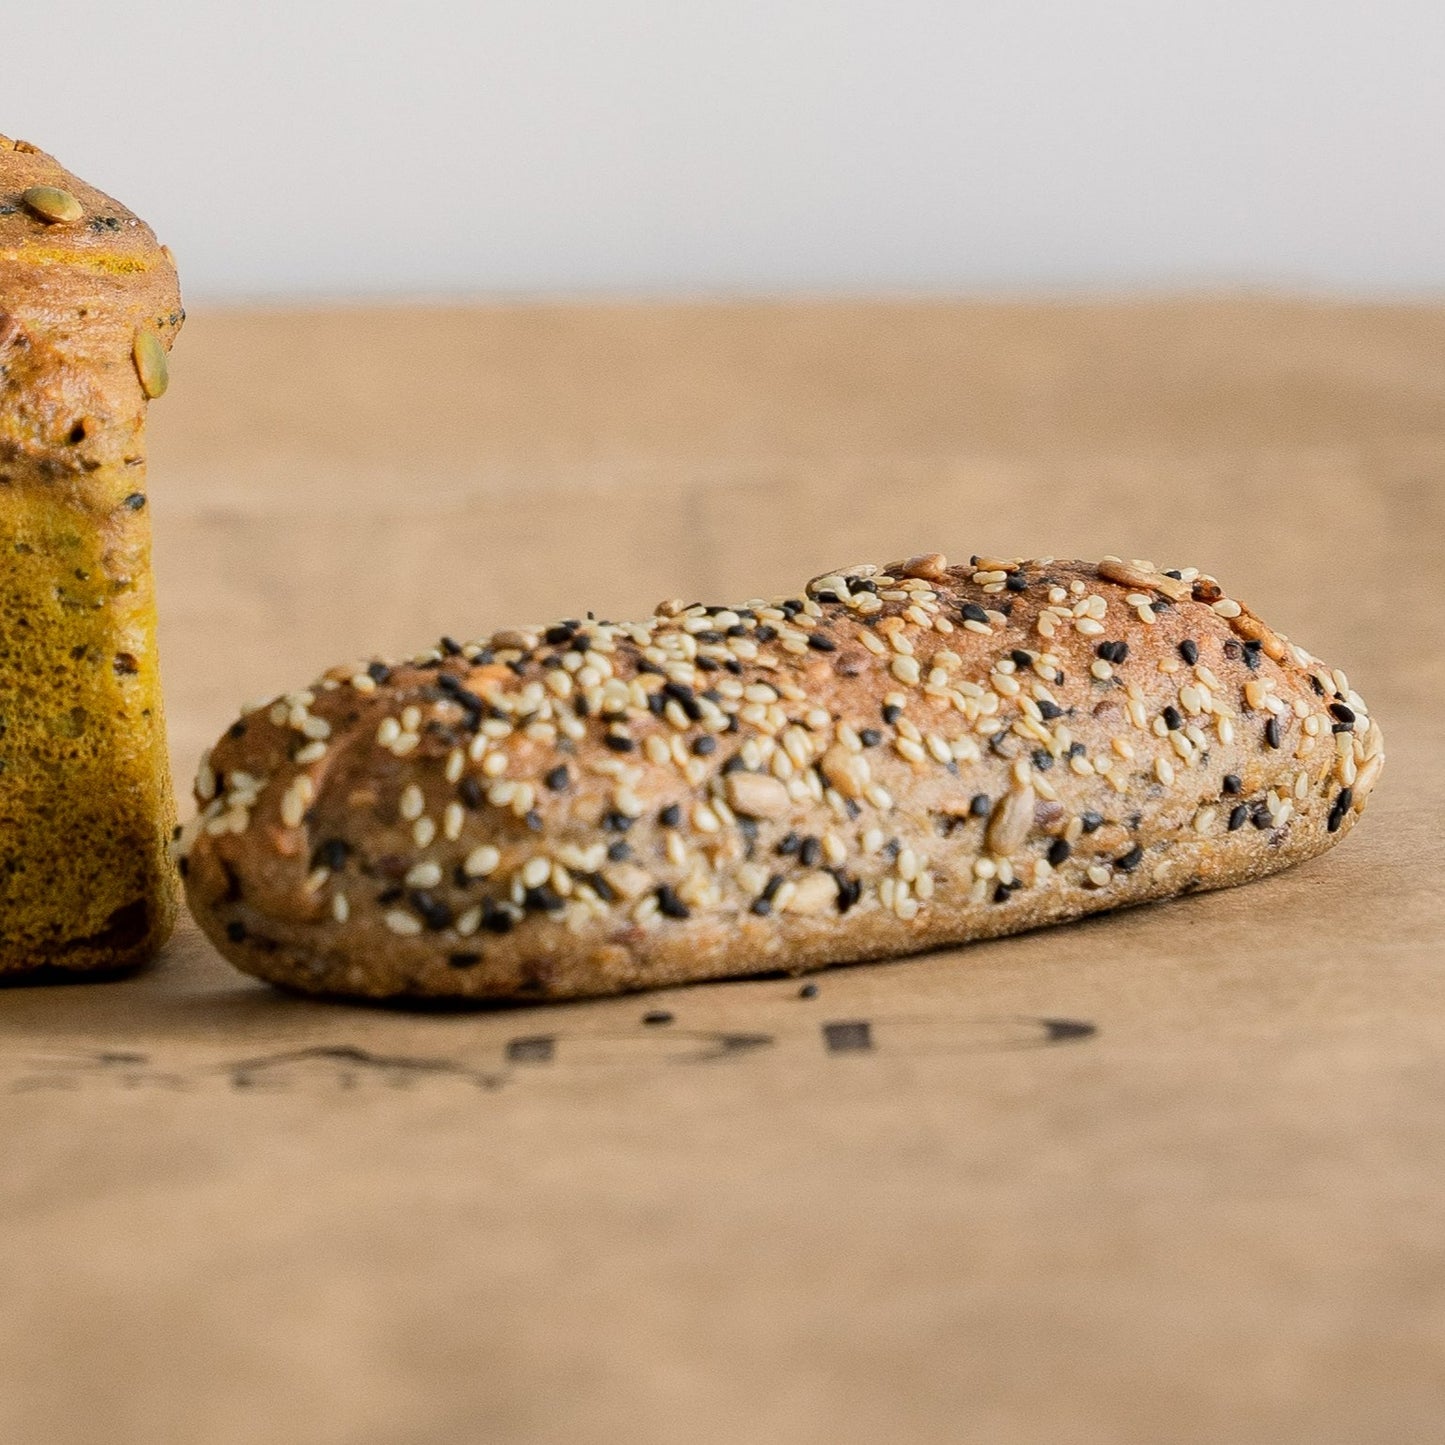 Gluten free baguette or small oval bread with grains